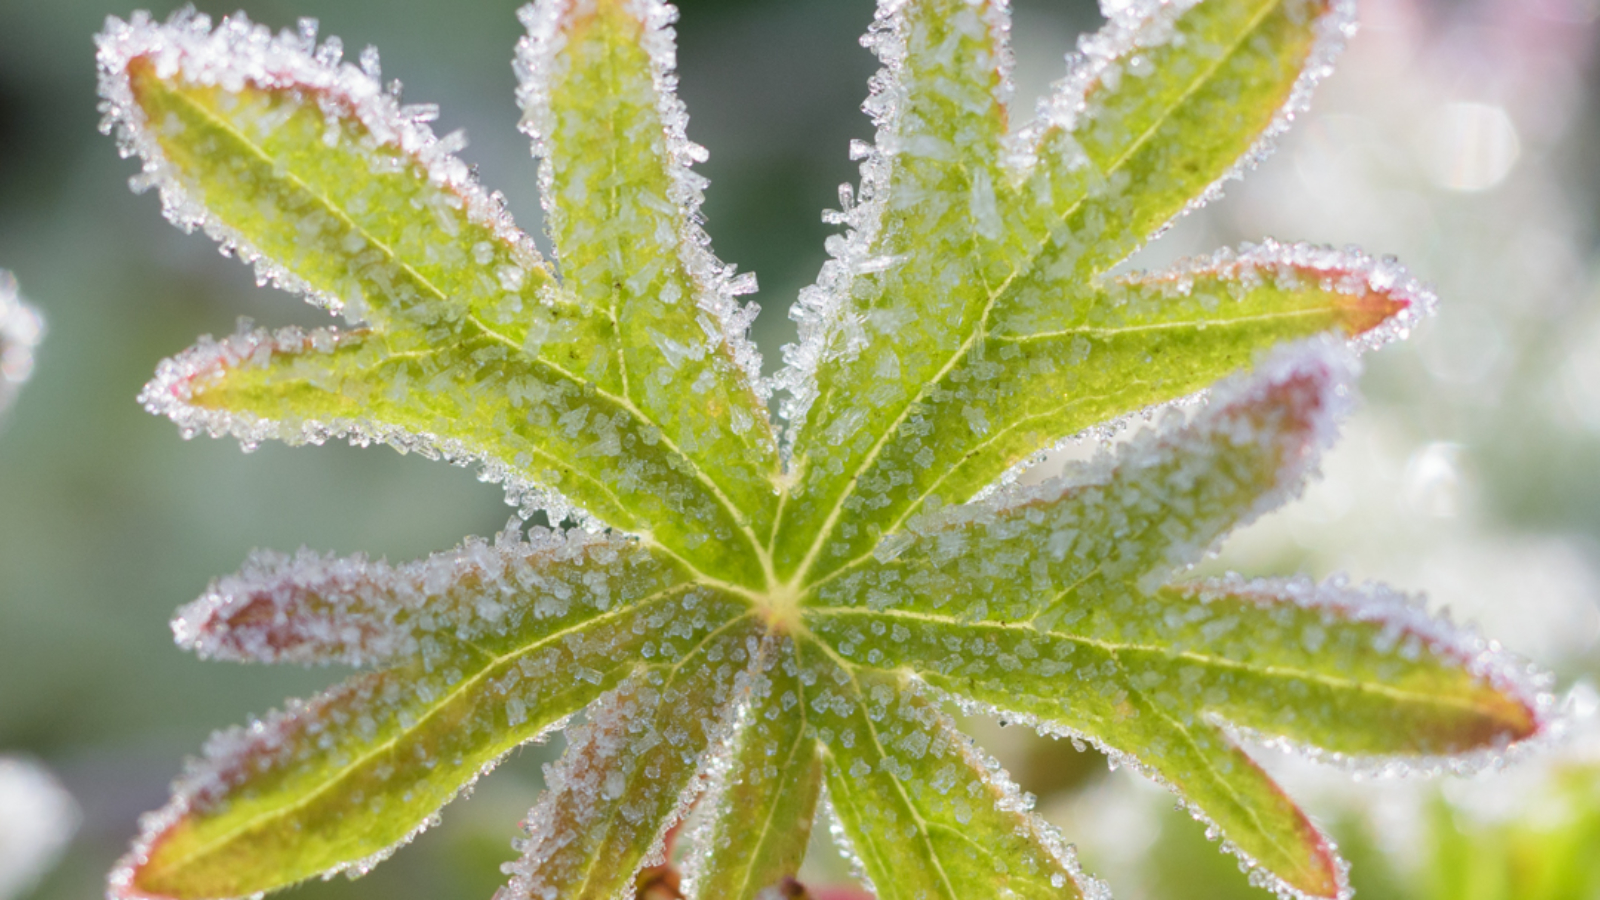 geranium leaf with frost